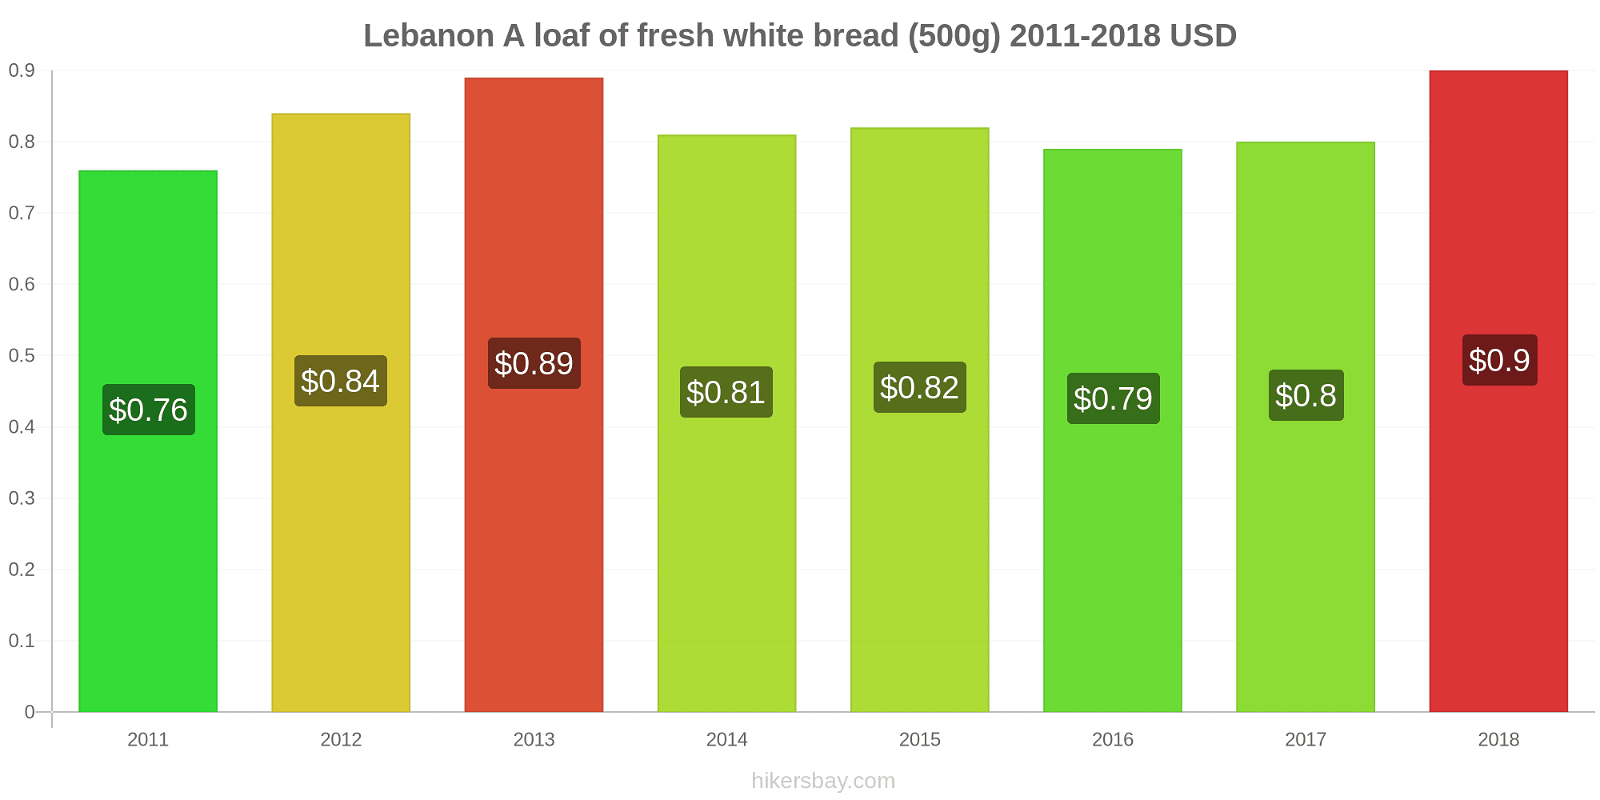 Lebanon price changes A loaf of fresh white bread (500g) hikersbay.com